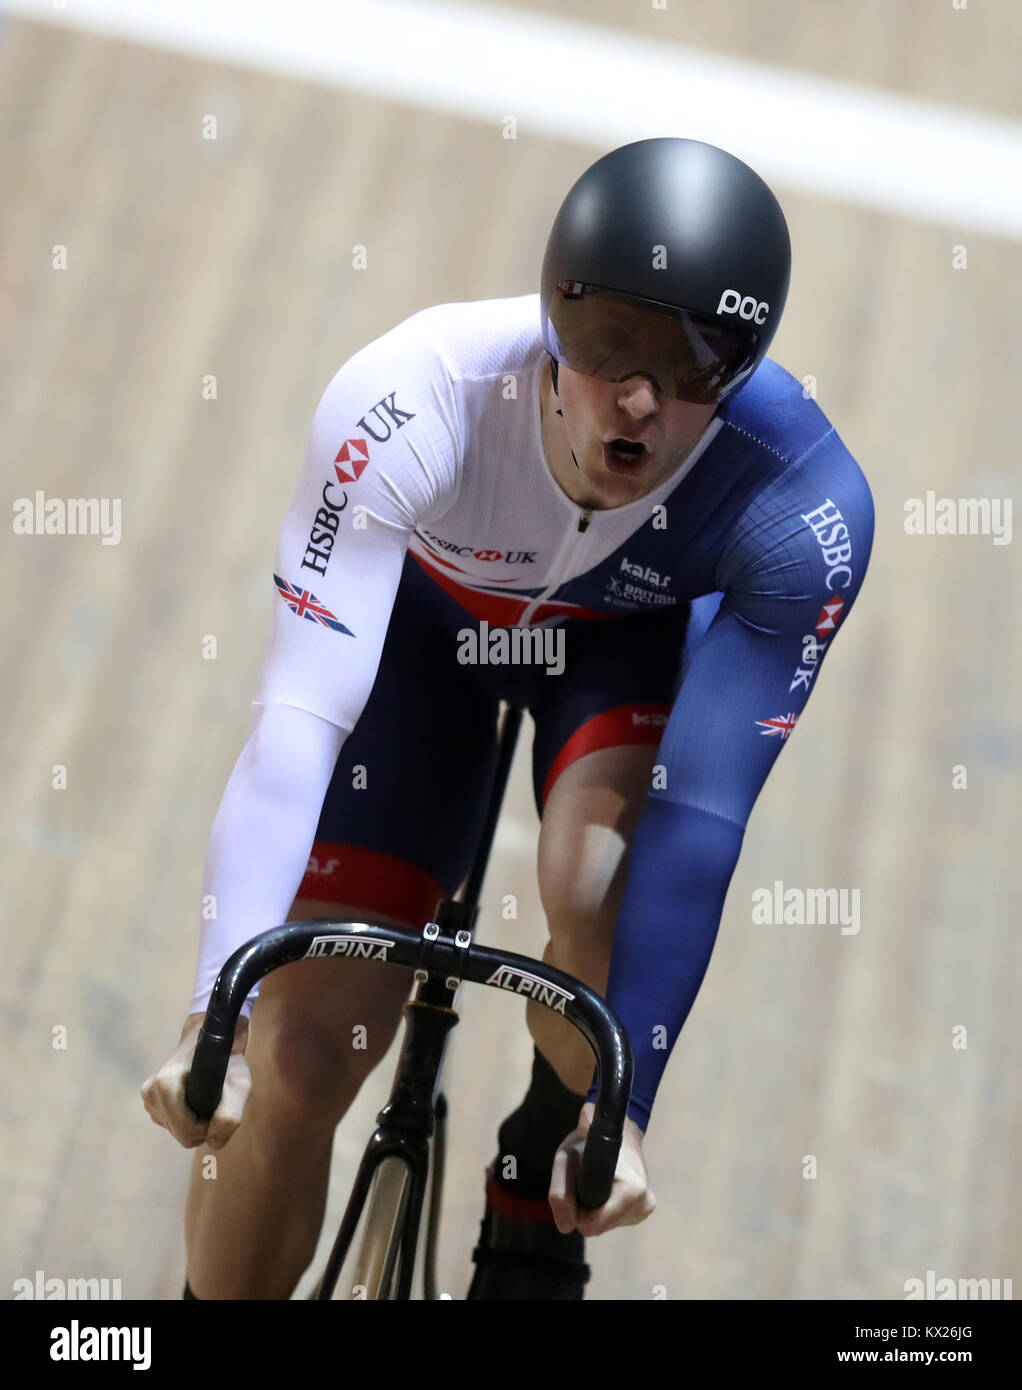 Jason Kenny finishes behind France's Gregory Bauge in the Men's Sprint Final during round three of the Revolution Series at the Manchester Velodrome. Stock Photo